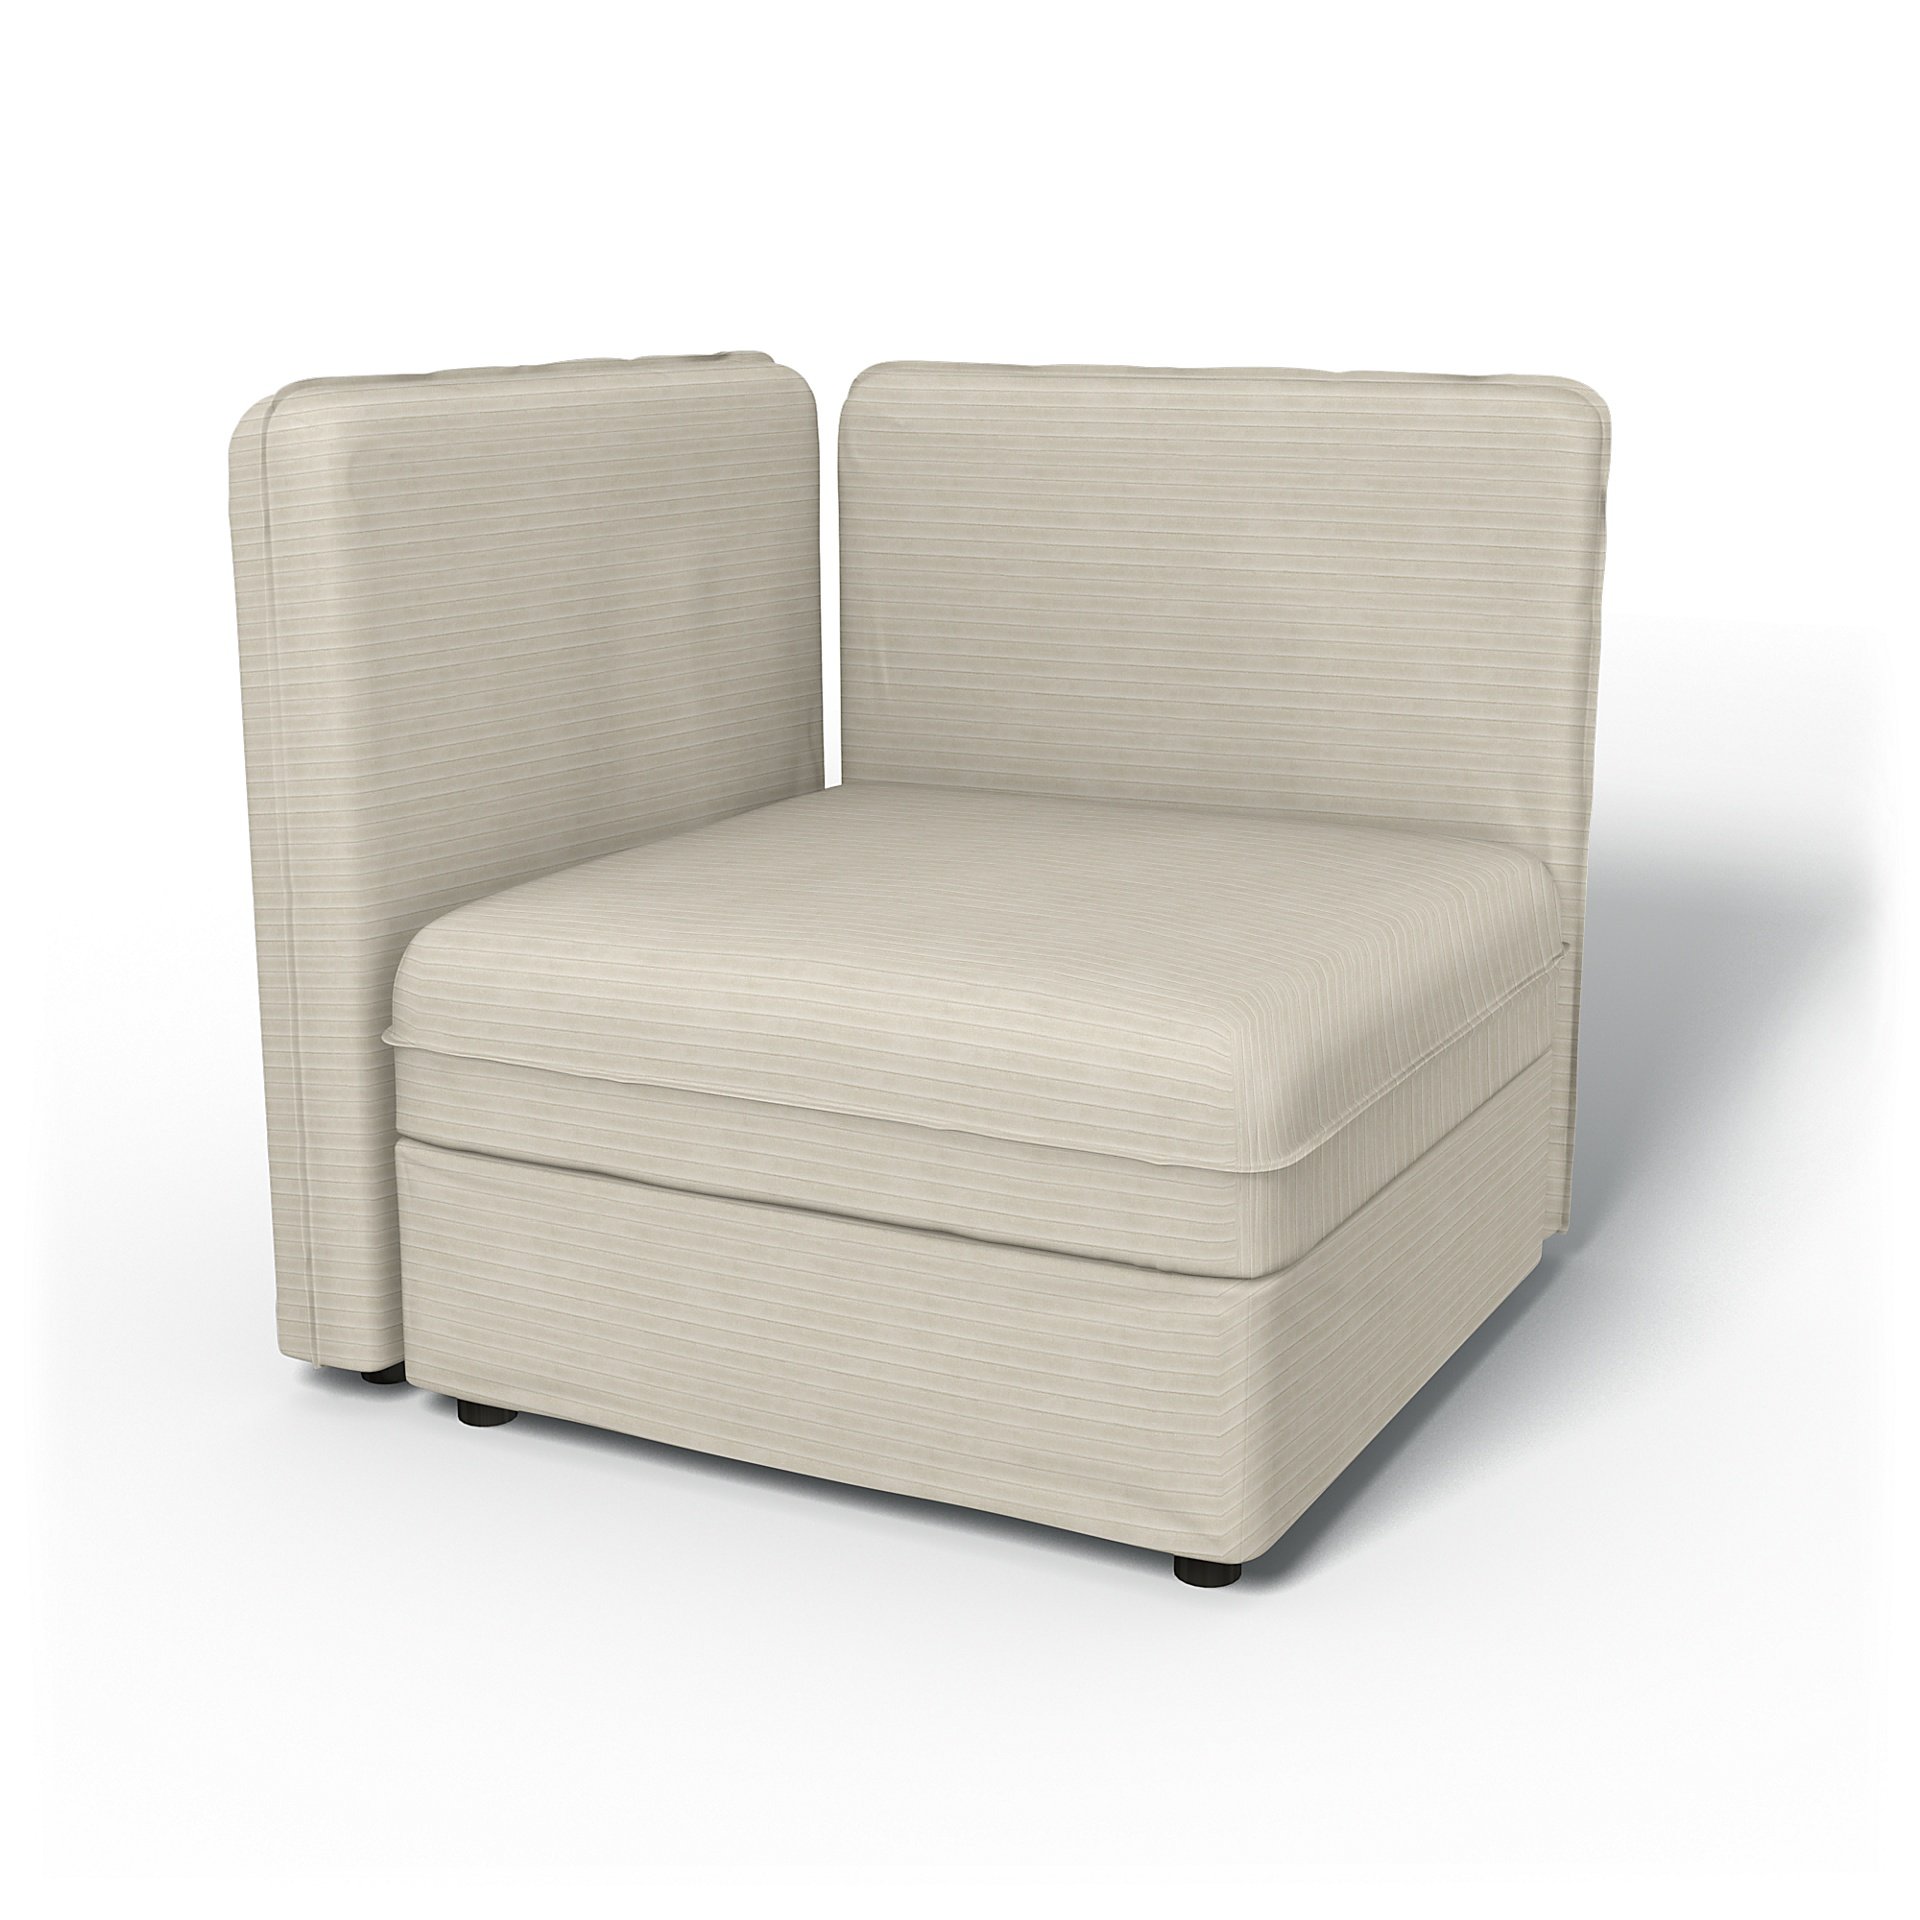 IKEA - Vallentuna Seat Module with Low Back and Storage Cover 80x80cm 32x32in, Tofu, Corduroy - Bemz